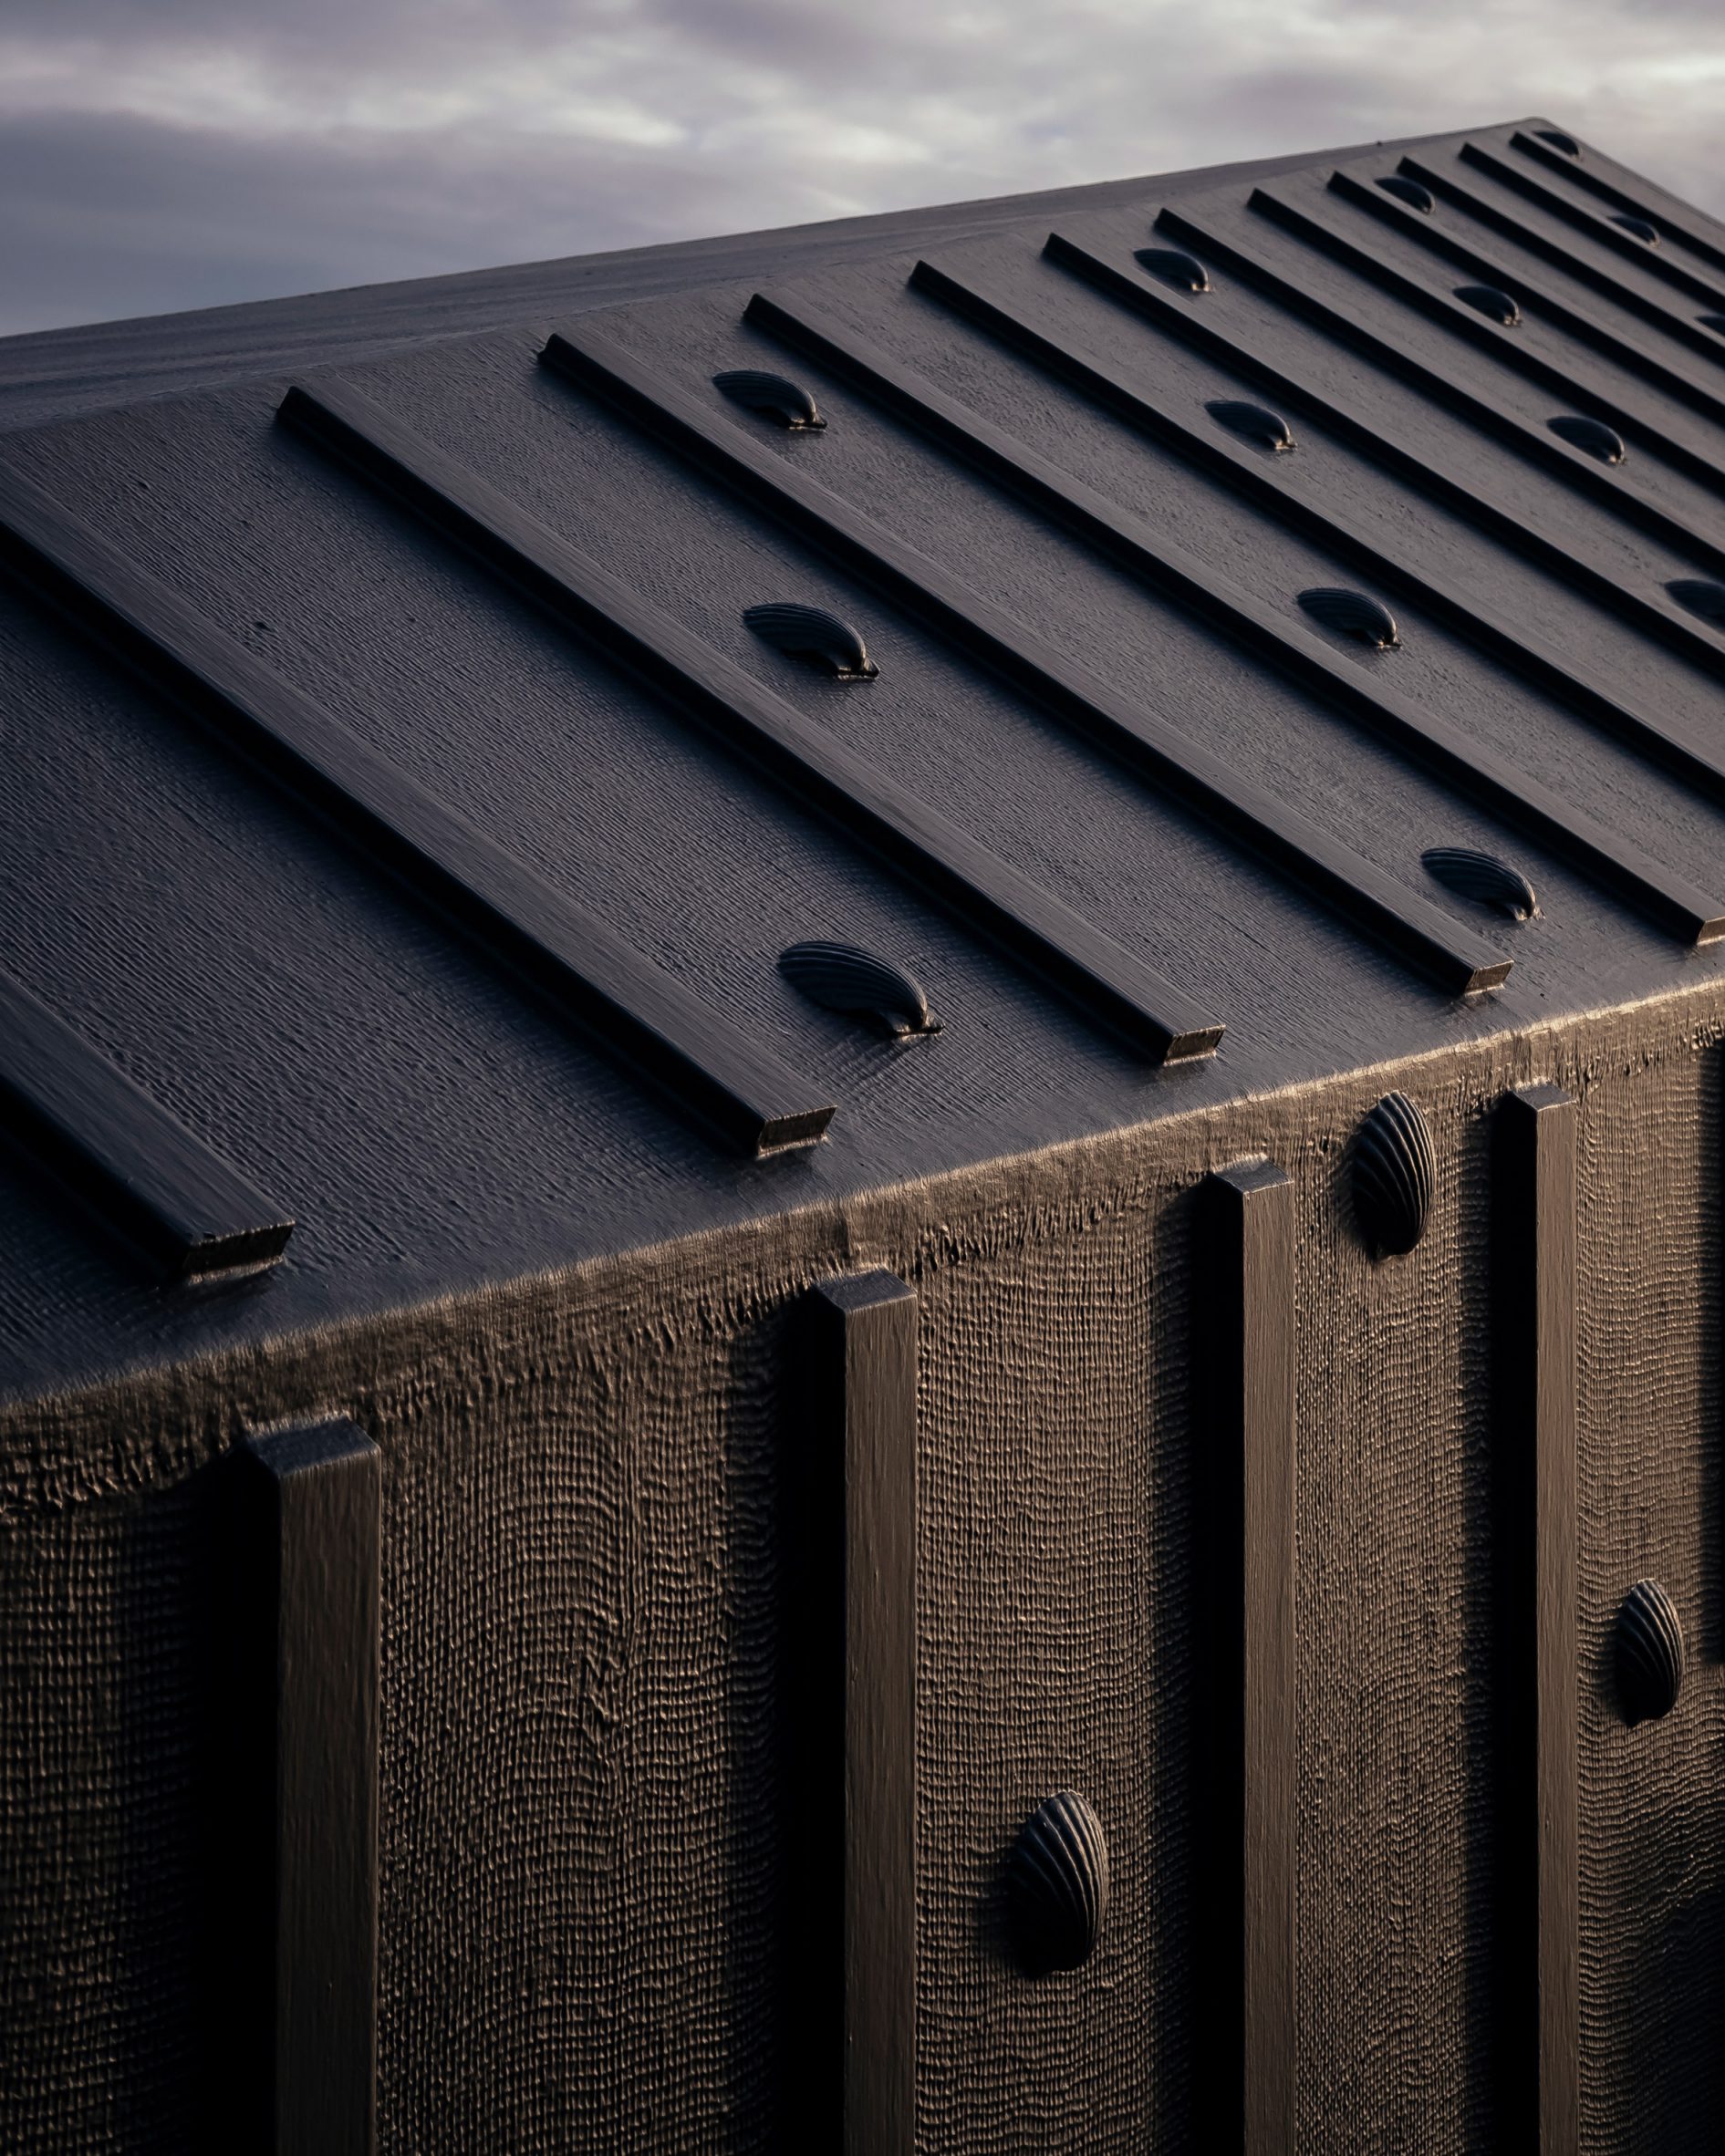 Black-rubber facade adorned with shells